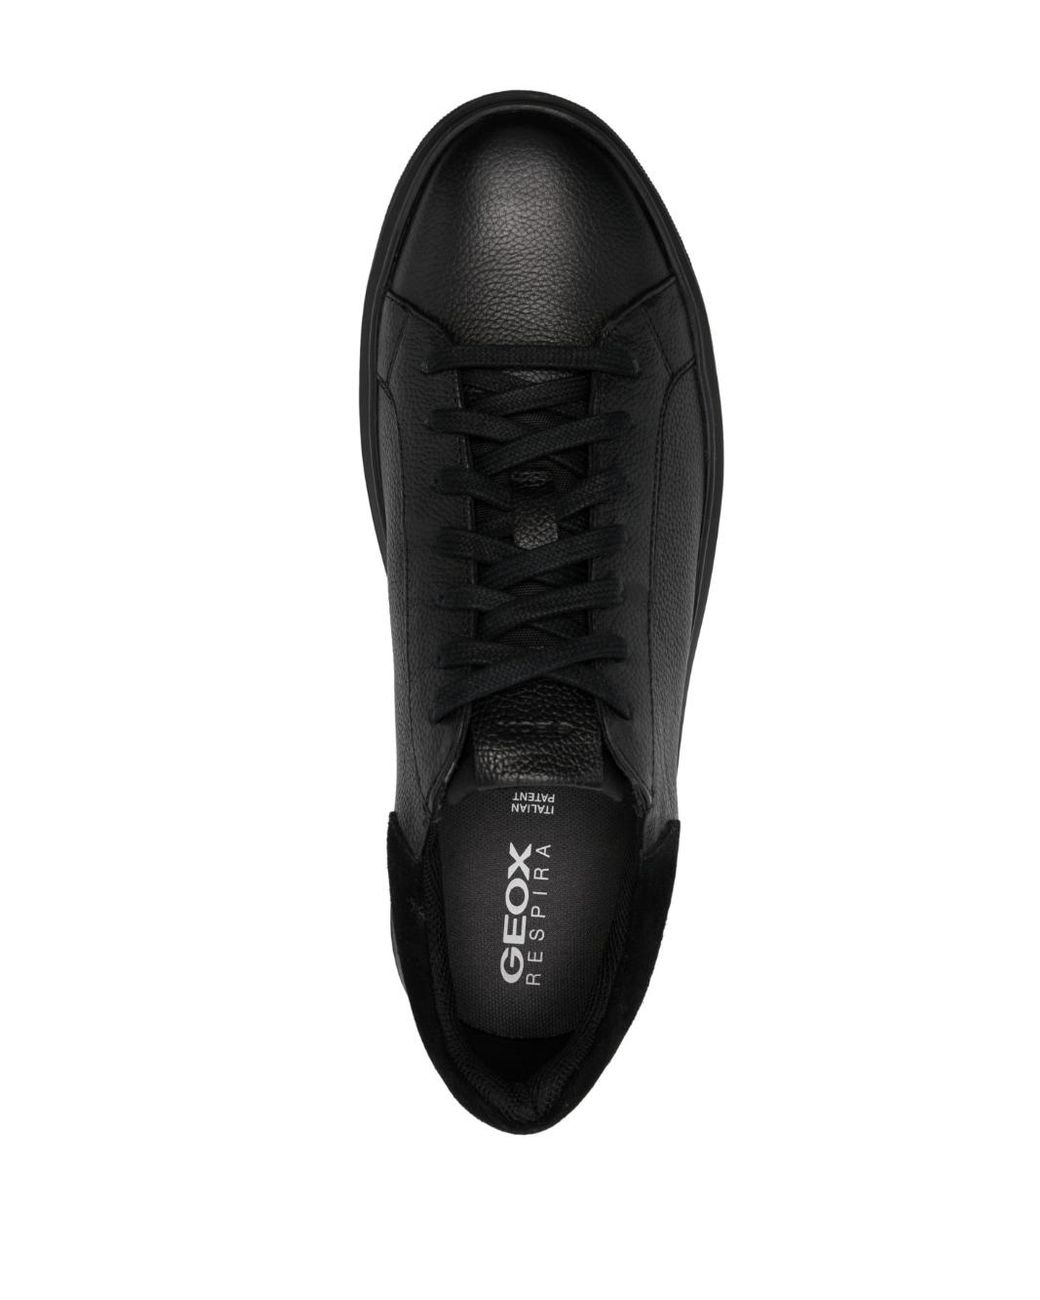 Geox Deiven Low-top Leather Sneakers in Black for Men | Lyst